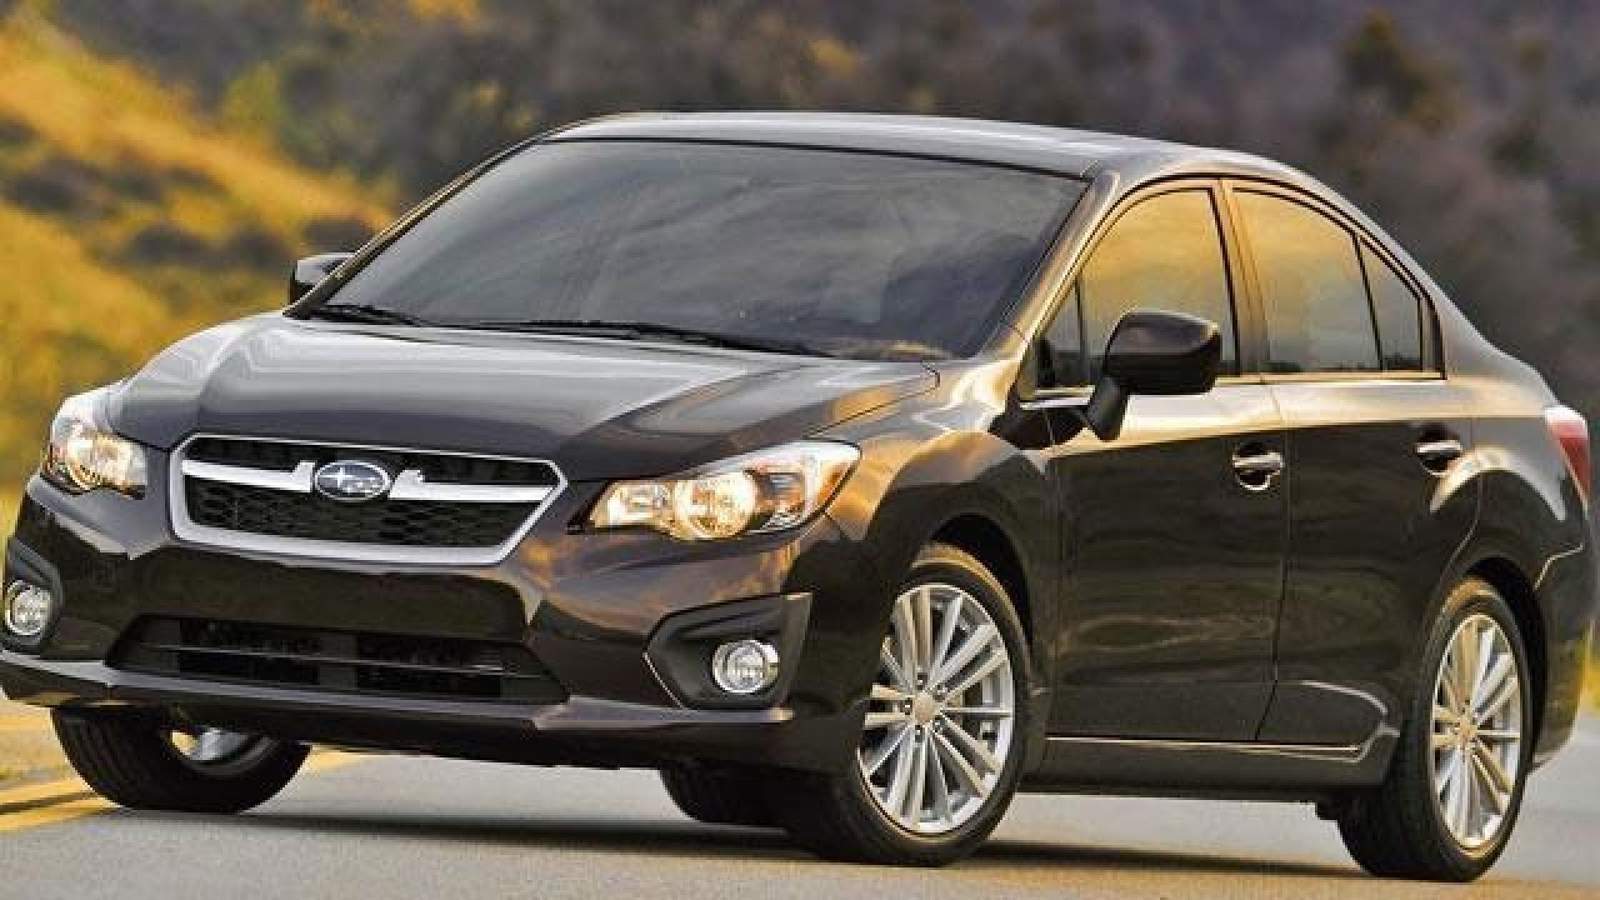 Subaru will pay to replace your cracked windshield if you drive one of these vehicles